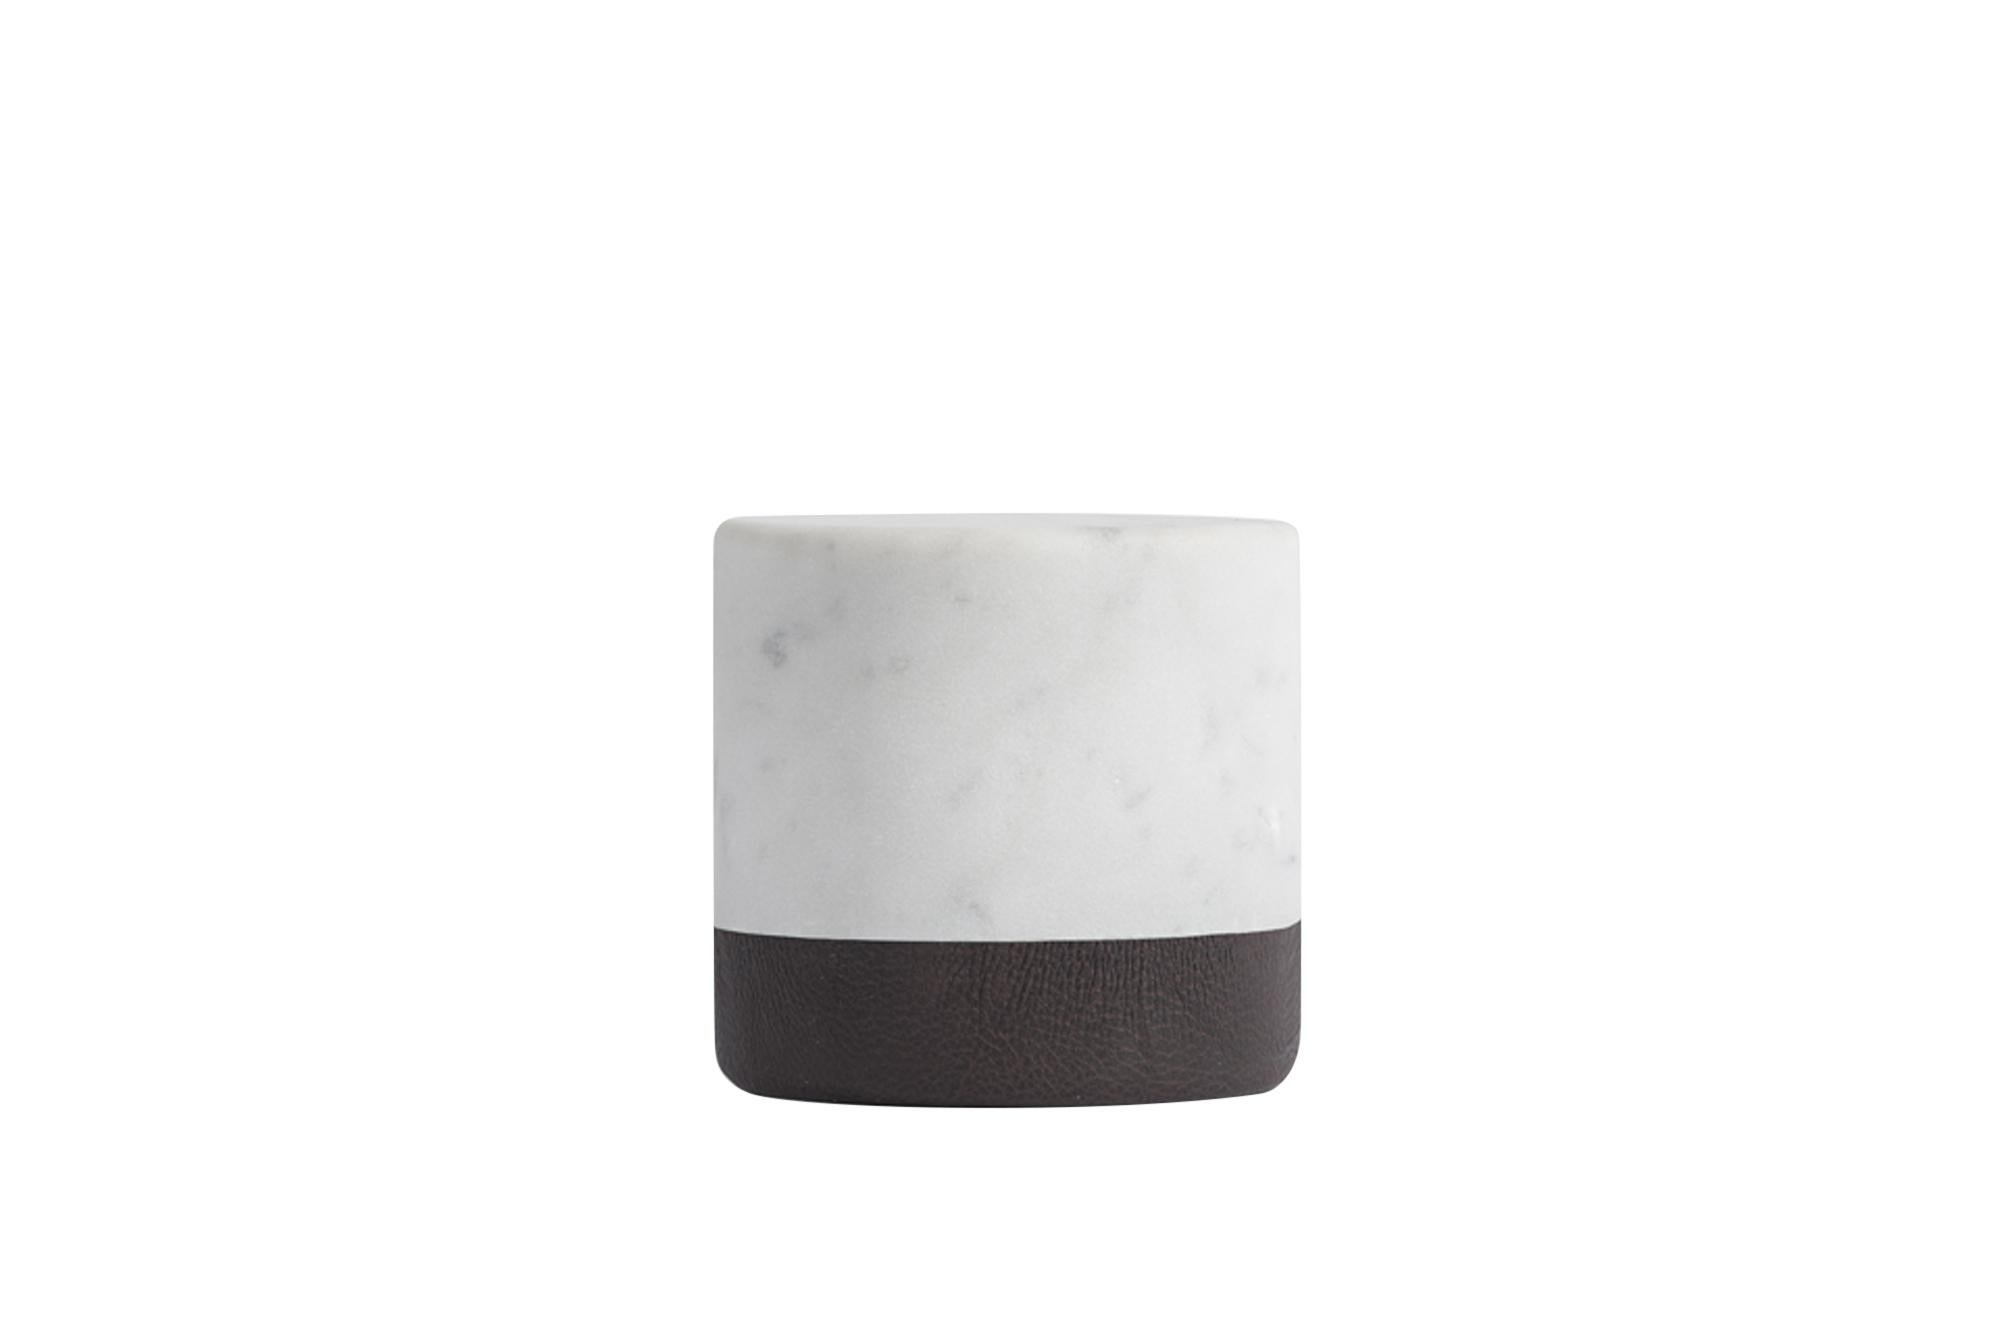 Salvatori Lui&Lei Paperweight in Bianco Carrara Marble by Vincent Van Duysen For Sale